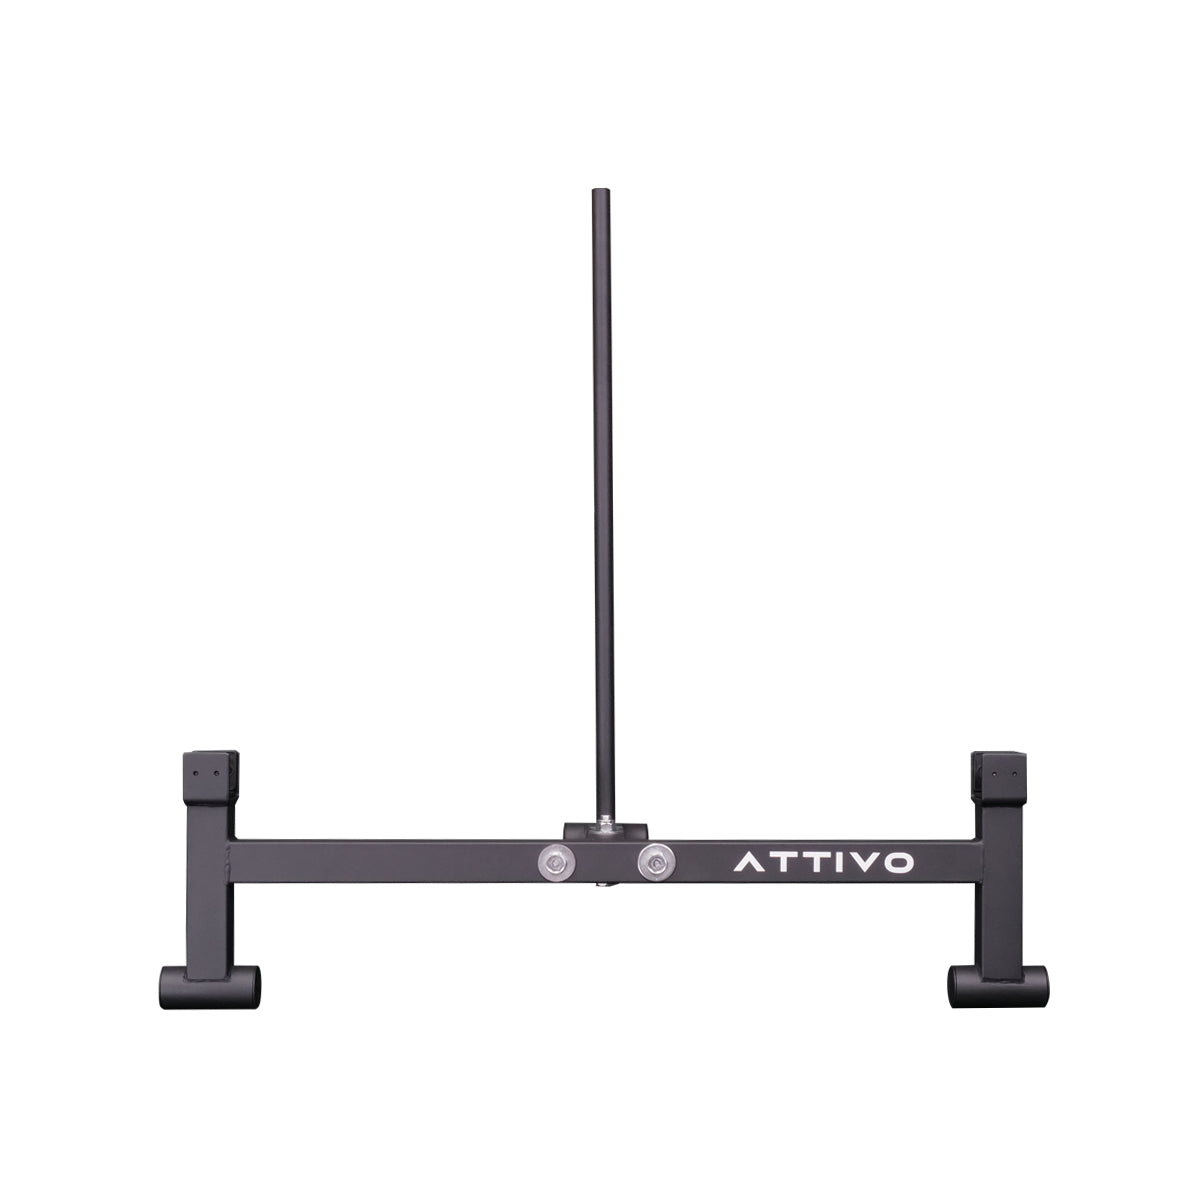 ATTIVO Full Deadlift Barbell Jack Stand, 300kg Capacity, Elevated Lift for Easy Loading and Unloading Barbell Weight Plates, Weight Training, Deadlift Exercises, Powerlifting, Home Gym